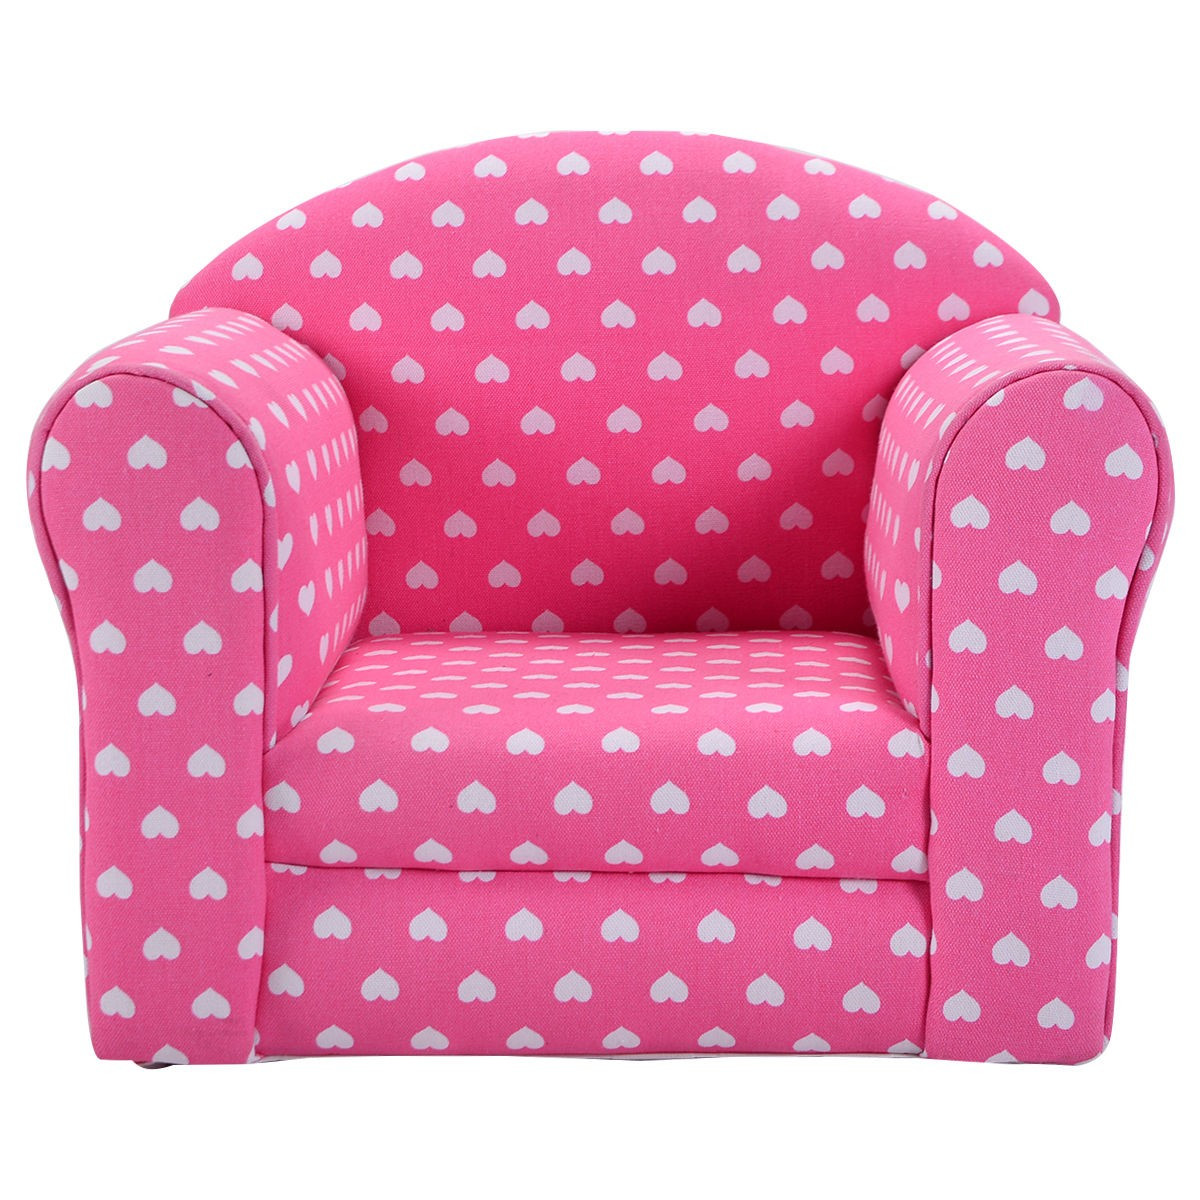 Kids Sofa And Chair
 Baby Kids Sofa Armrest Chair Couch Children Living Room